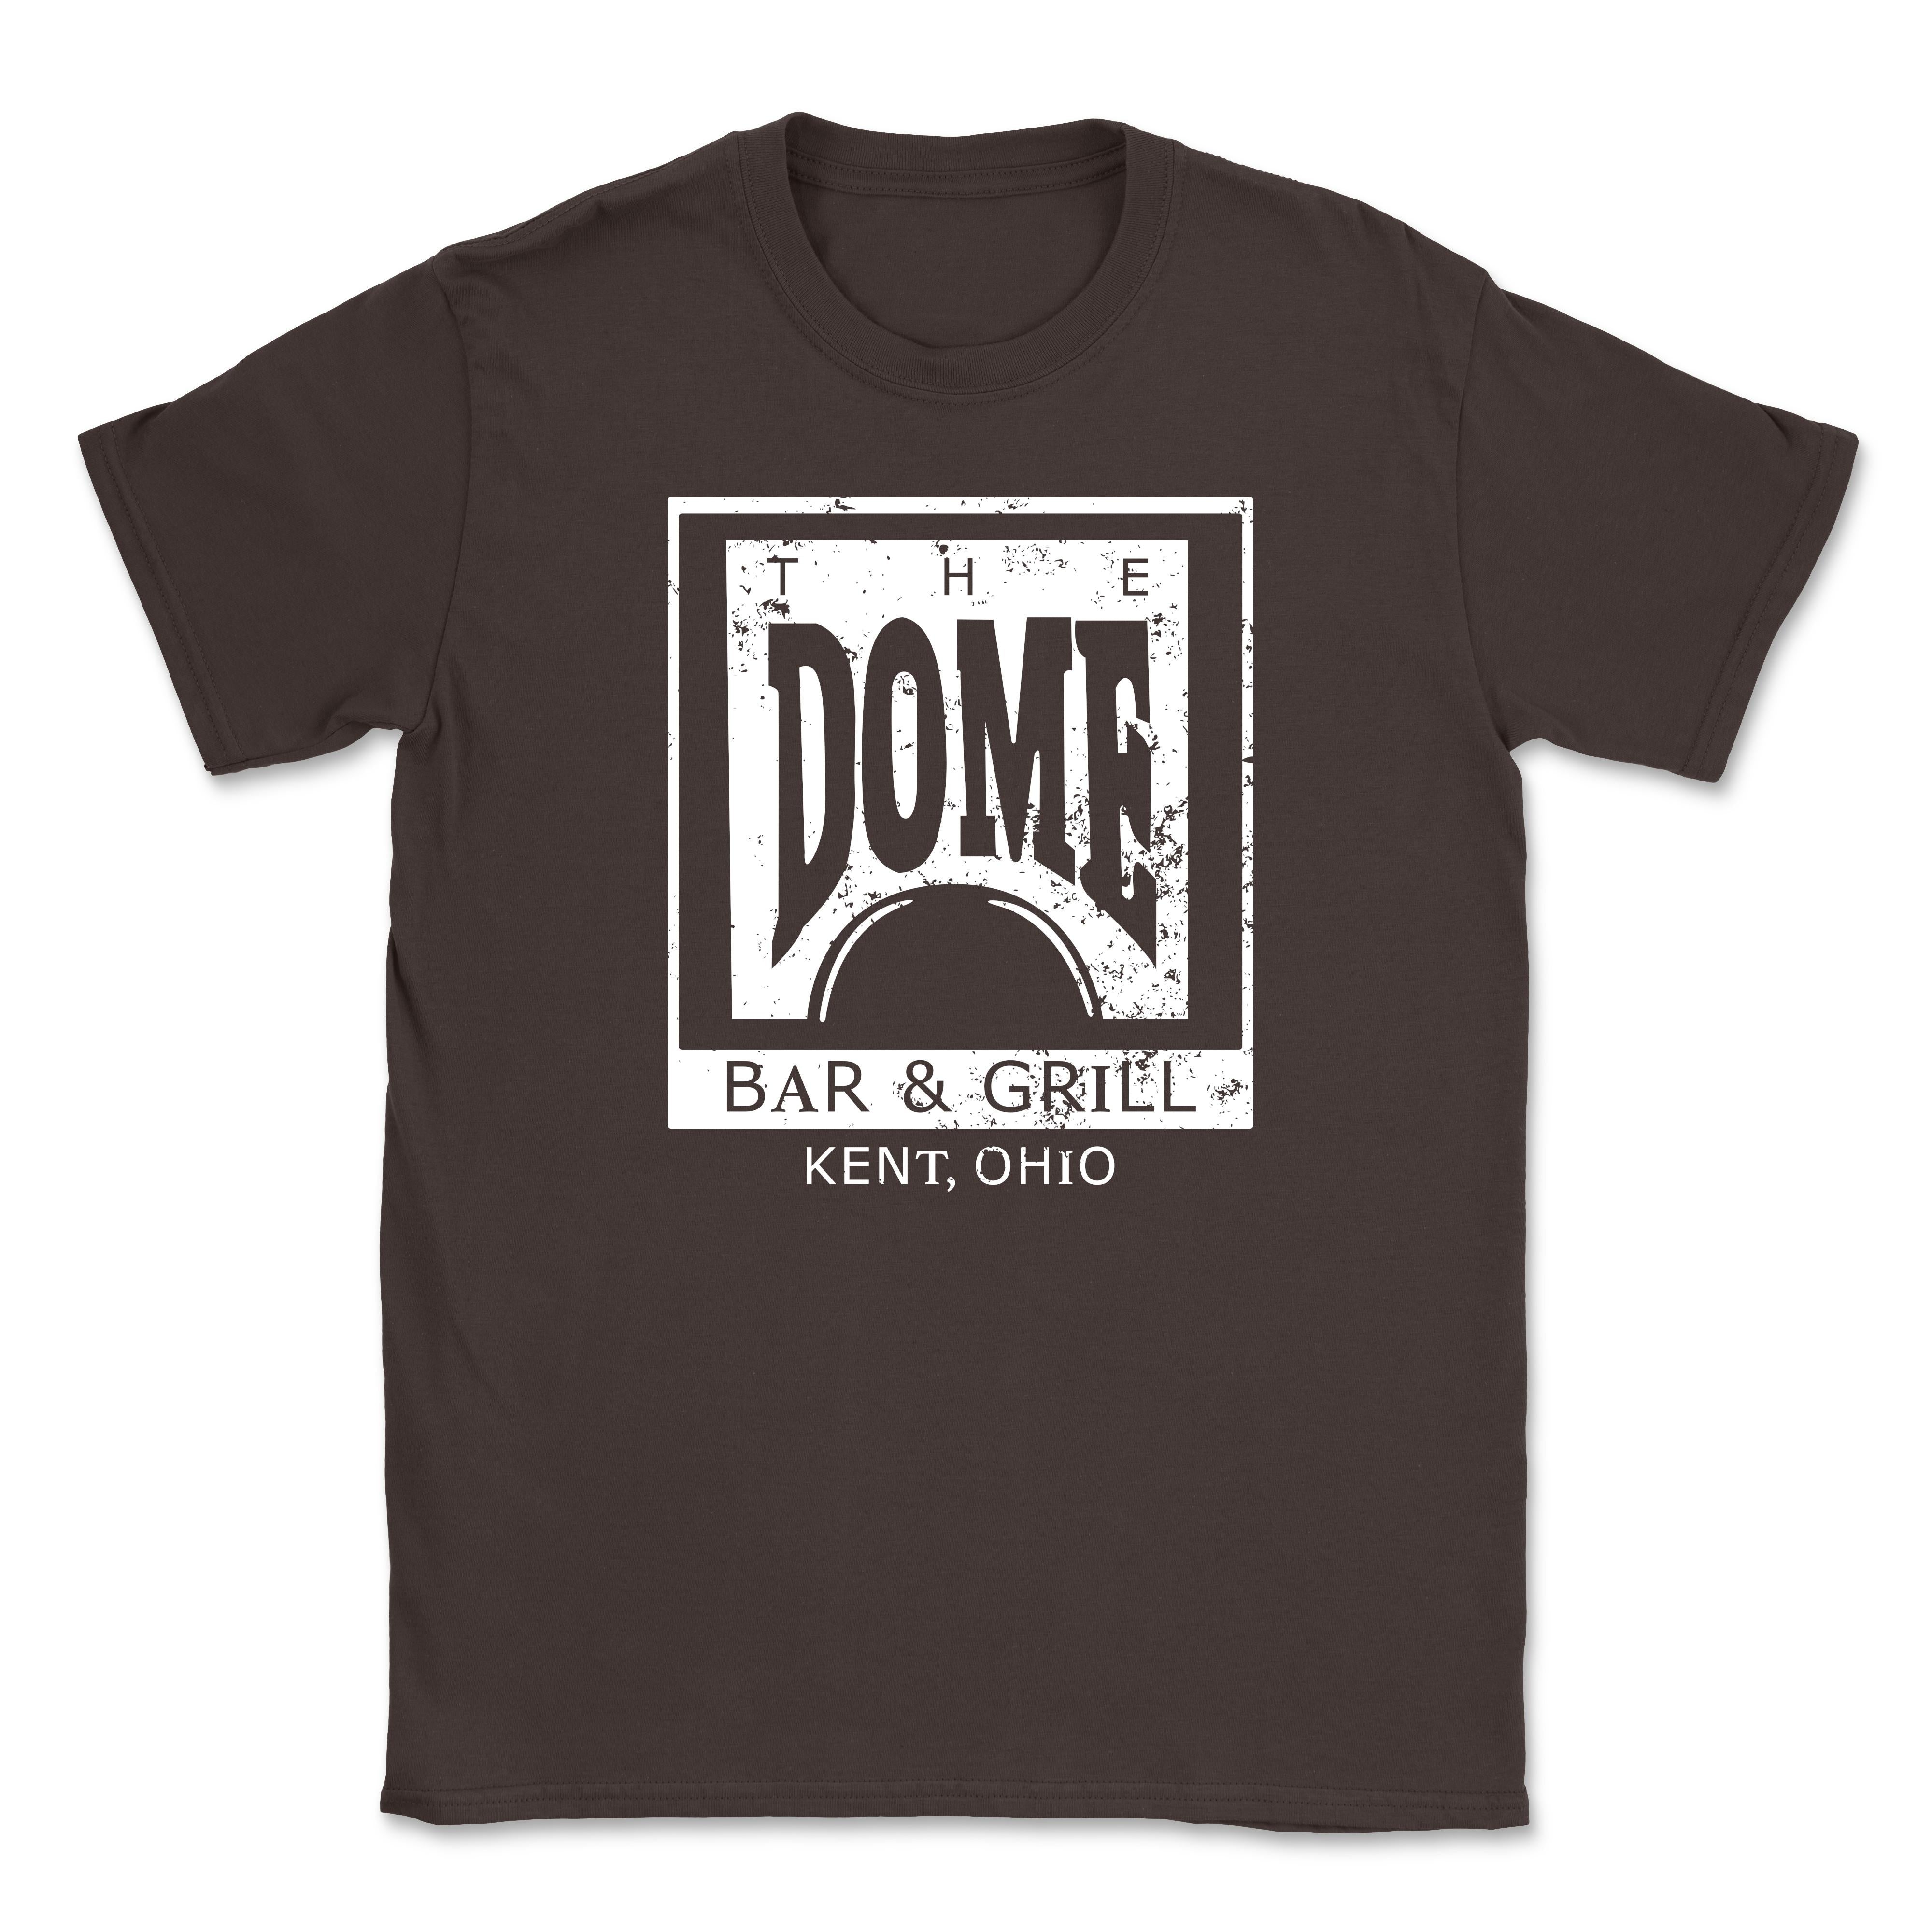 Kent The Dome T-Shirt